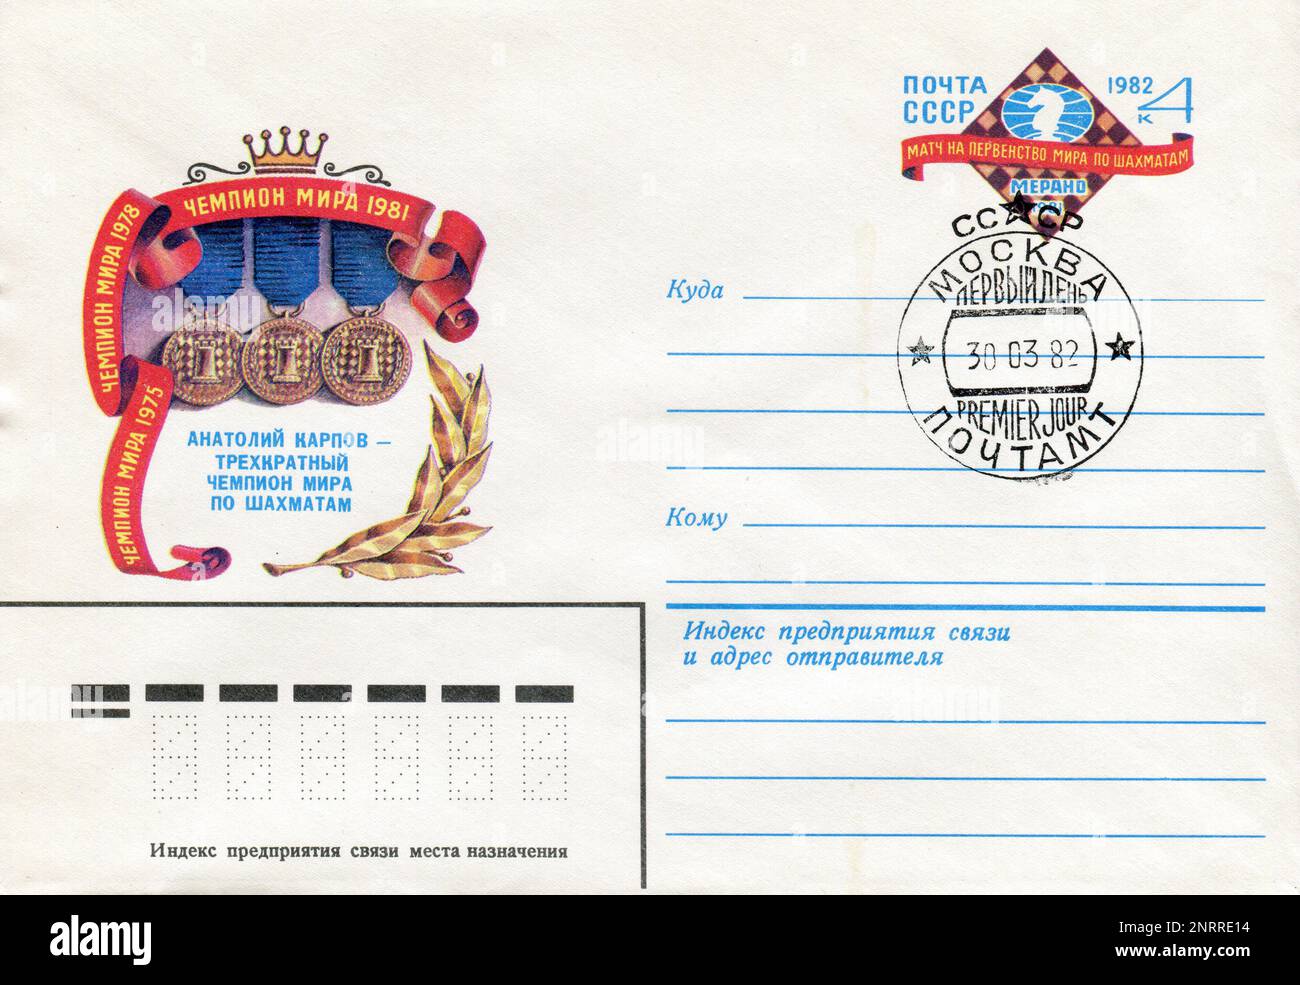 USSR - circa 1982: an USSR Post First Day Cover mailing envelope with stamps. Anatoly Yevgenyevich Karpov (Russian: Анатолий Евгеньевич Карпов; born May 23, 1951) is a Russian and former Soviet chess grandmaster, former World Chess Champion, and politician. Stock Photo